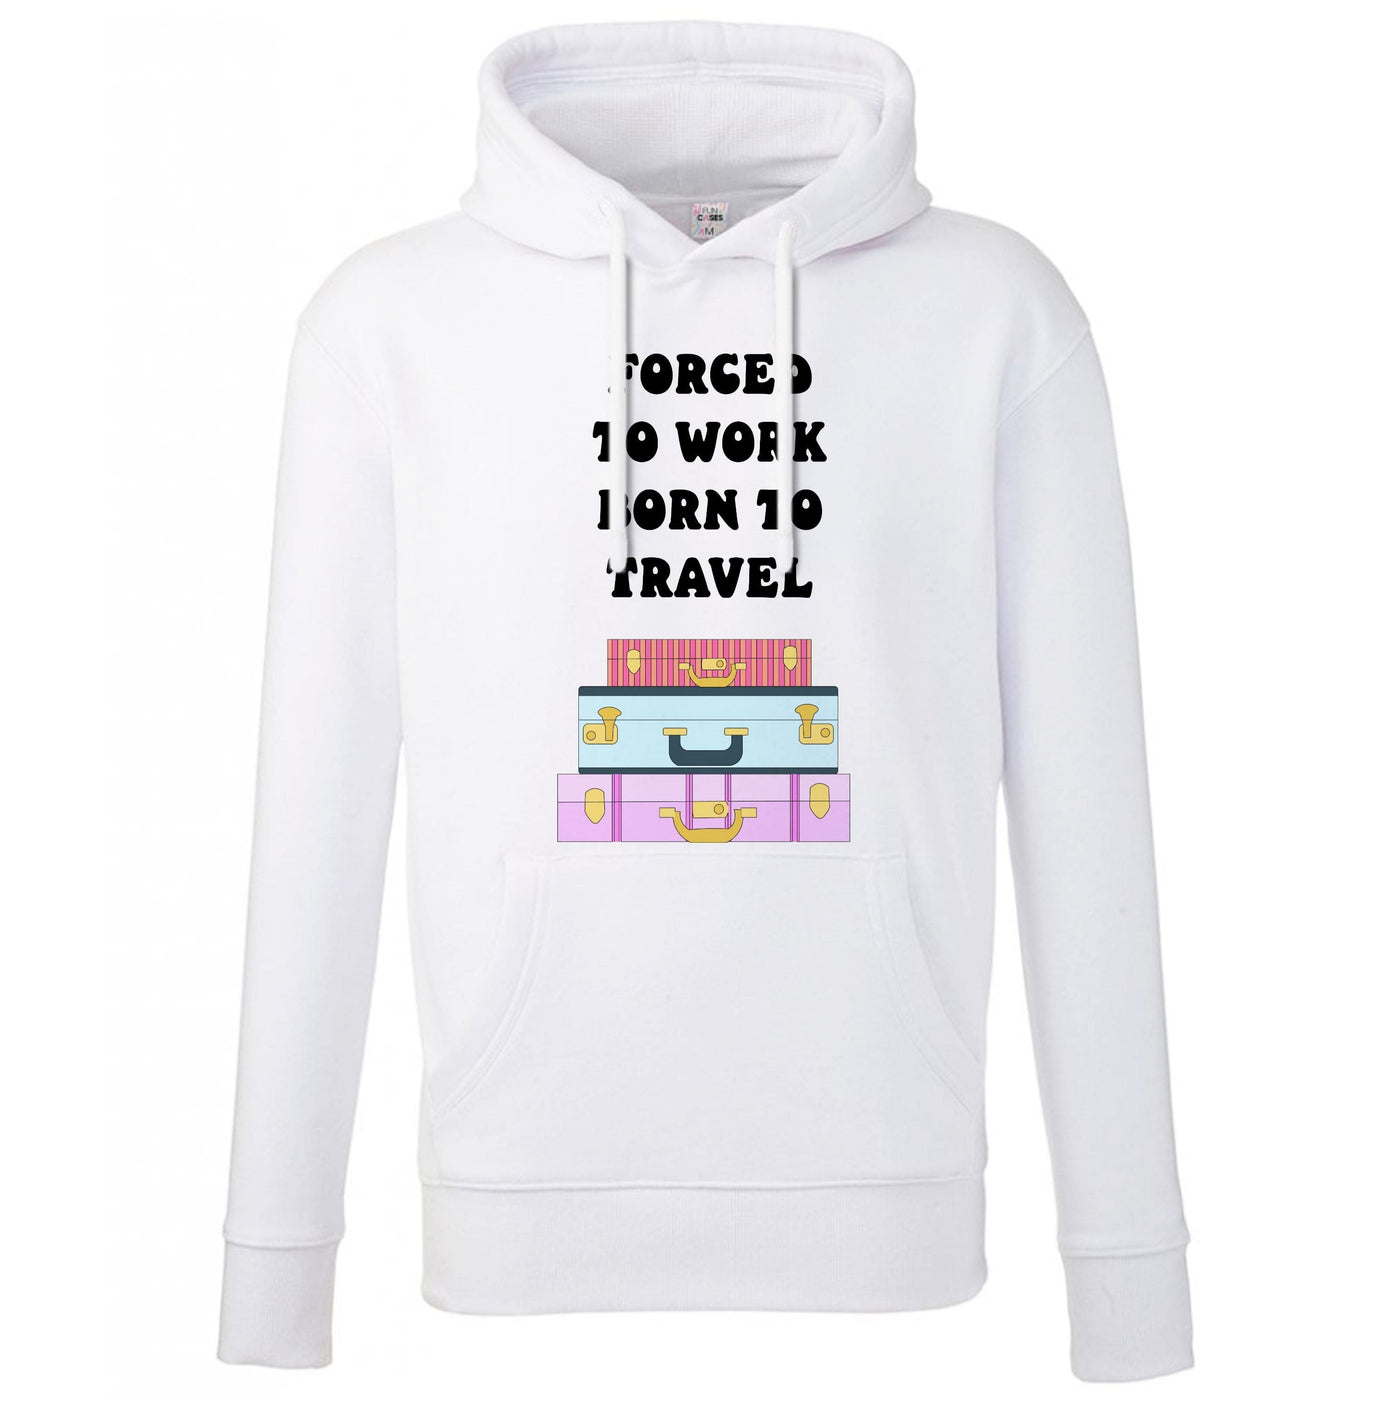 Forced To Work Born To Travel - Travel Hoodie